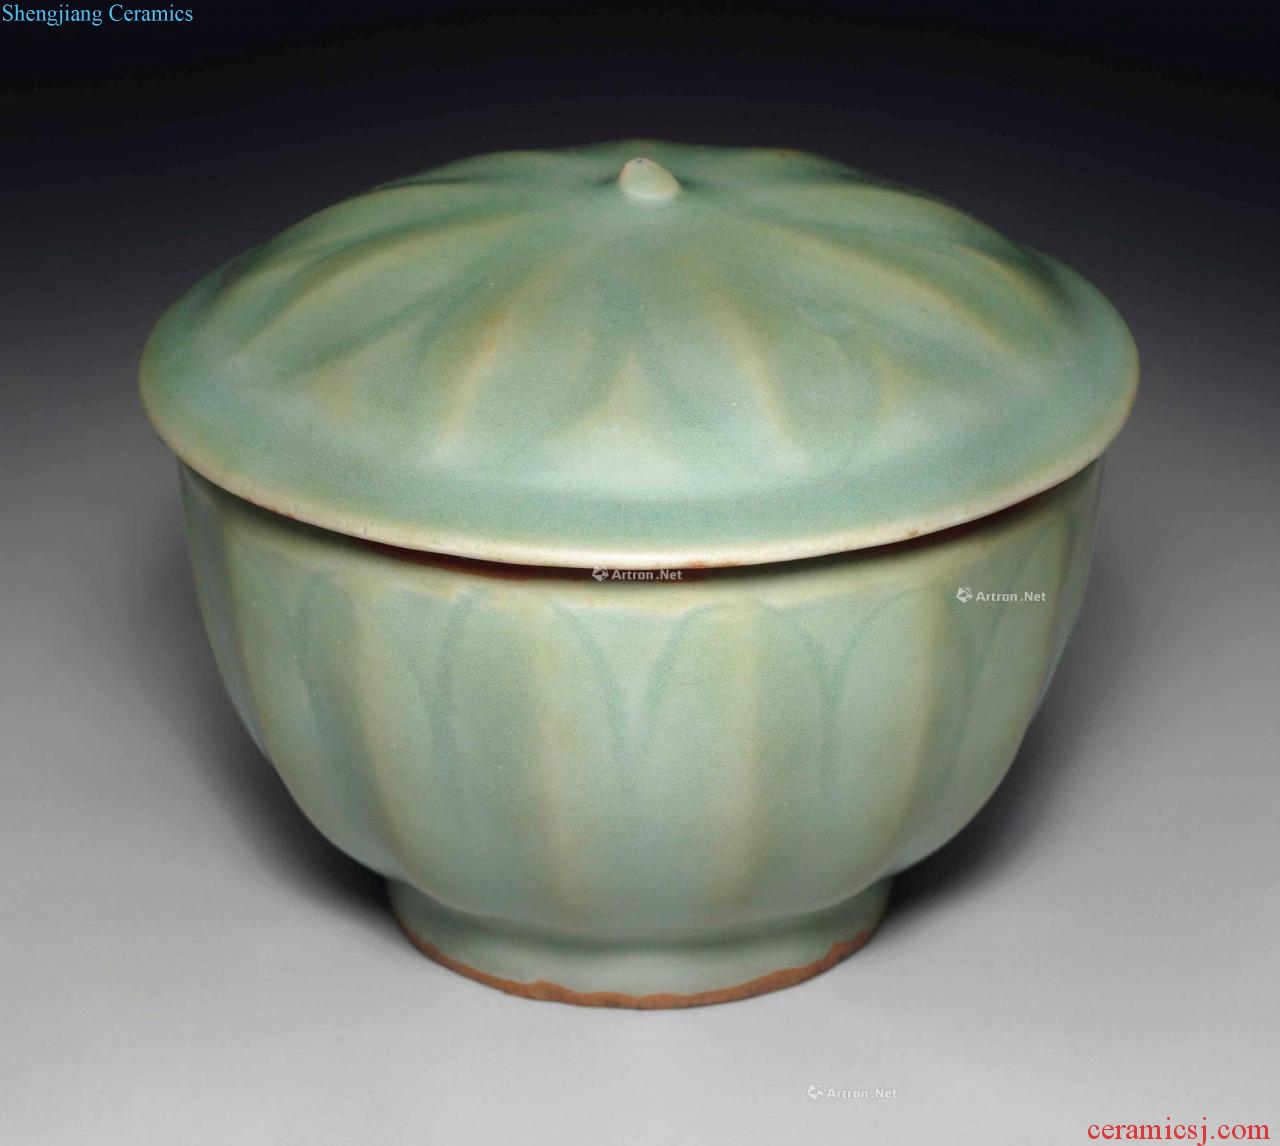 The southern song dynasty (1127-1279) A LONGQUAN CELADON 'LOTUS' BOWL AND COVER